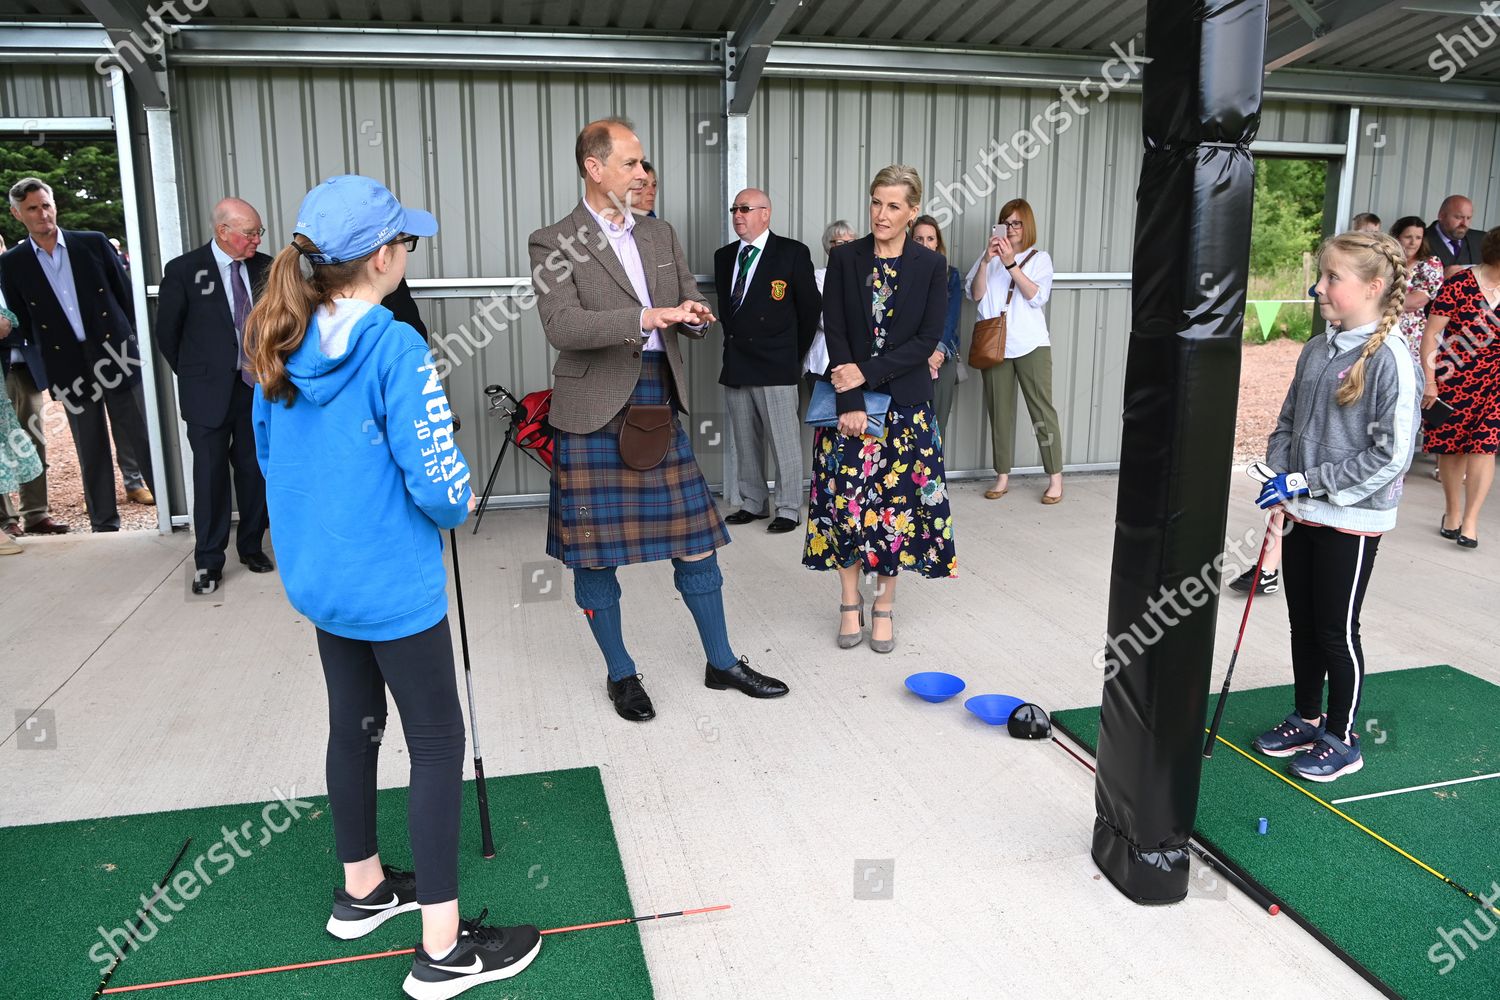 prince-edward-and-sophie-countess-of-wessex-visit-to-forfar-golf-club-scotland-uk-shutterstock-editorial-12172307ba.jpg